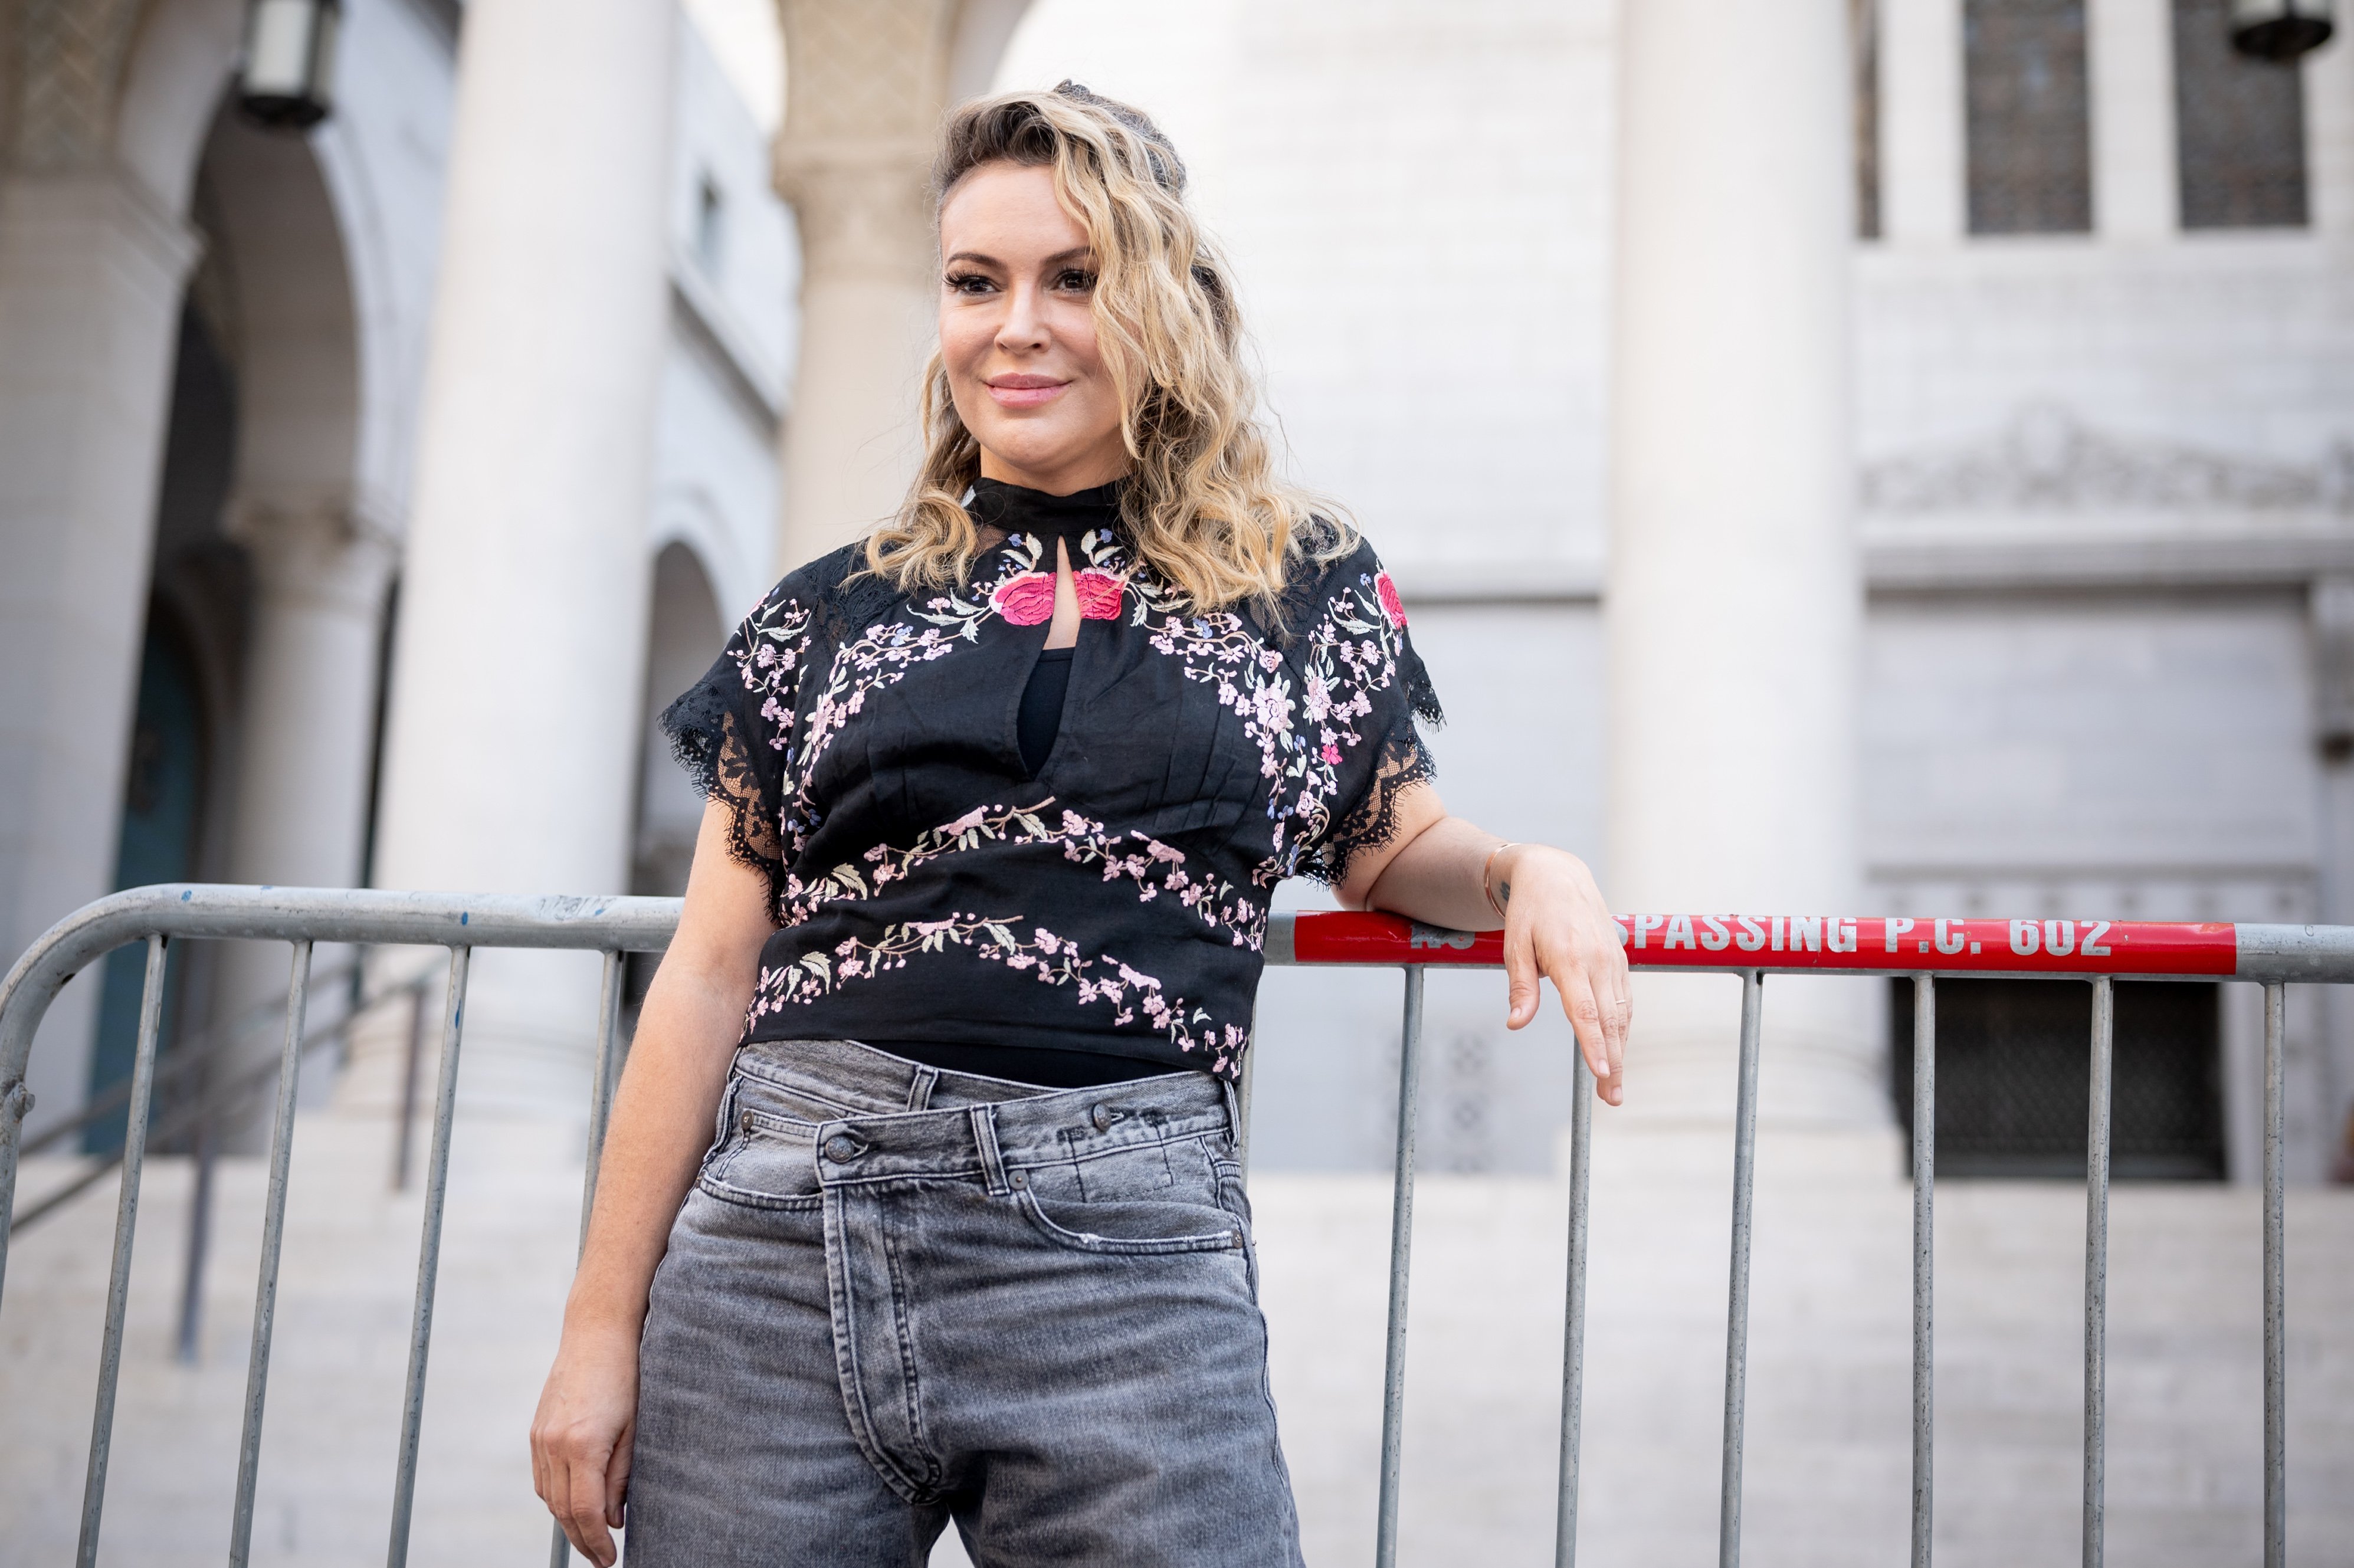 Alyssa Milano at the Women's March 4 Reproductive Rights in LA, 2021 | Source: Getty Images 